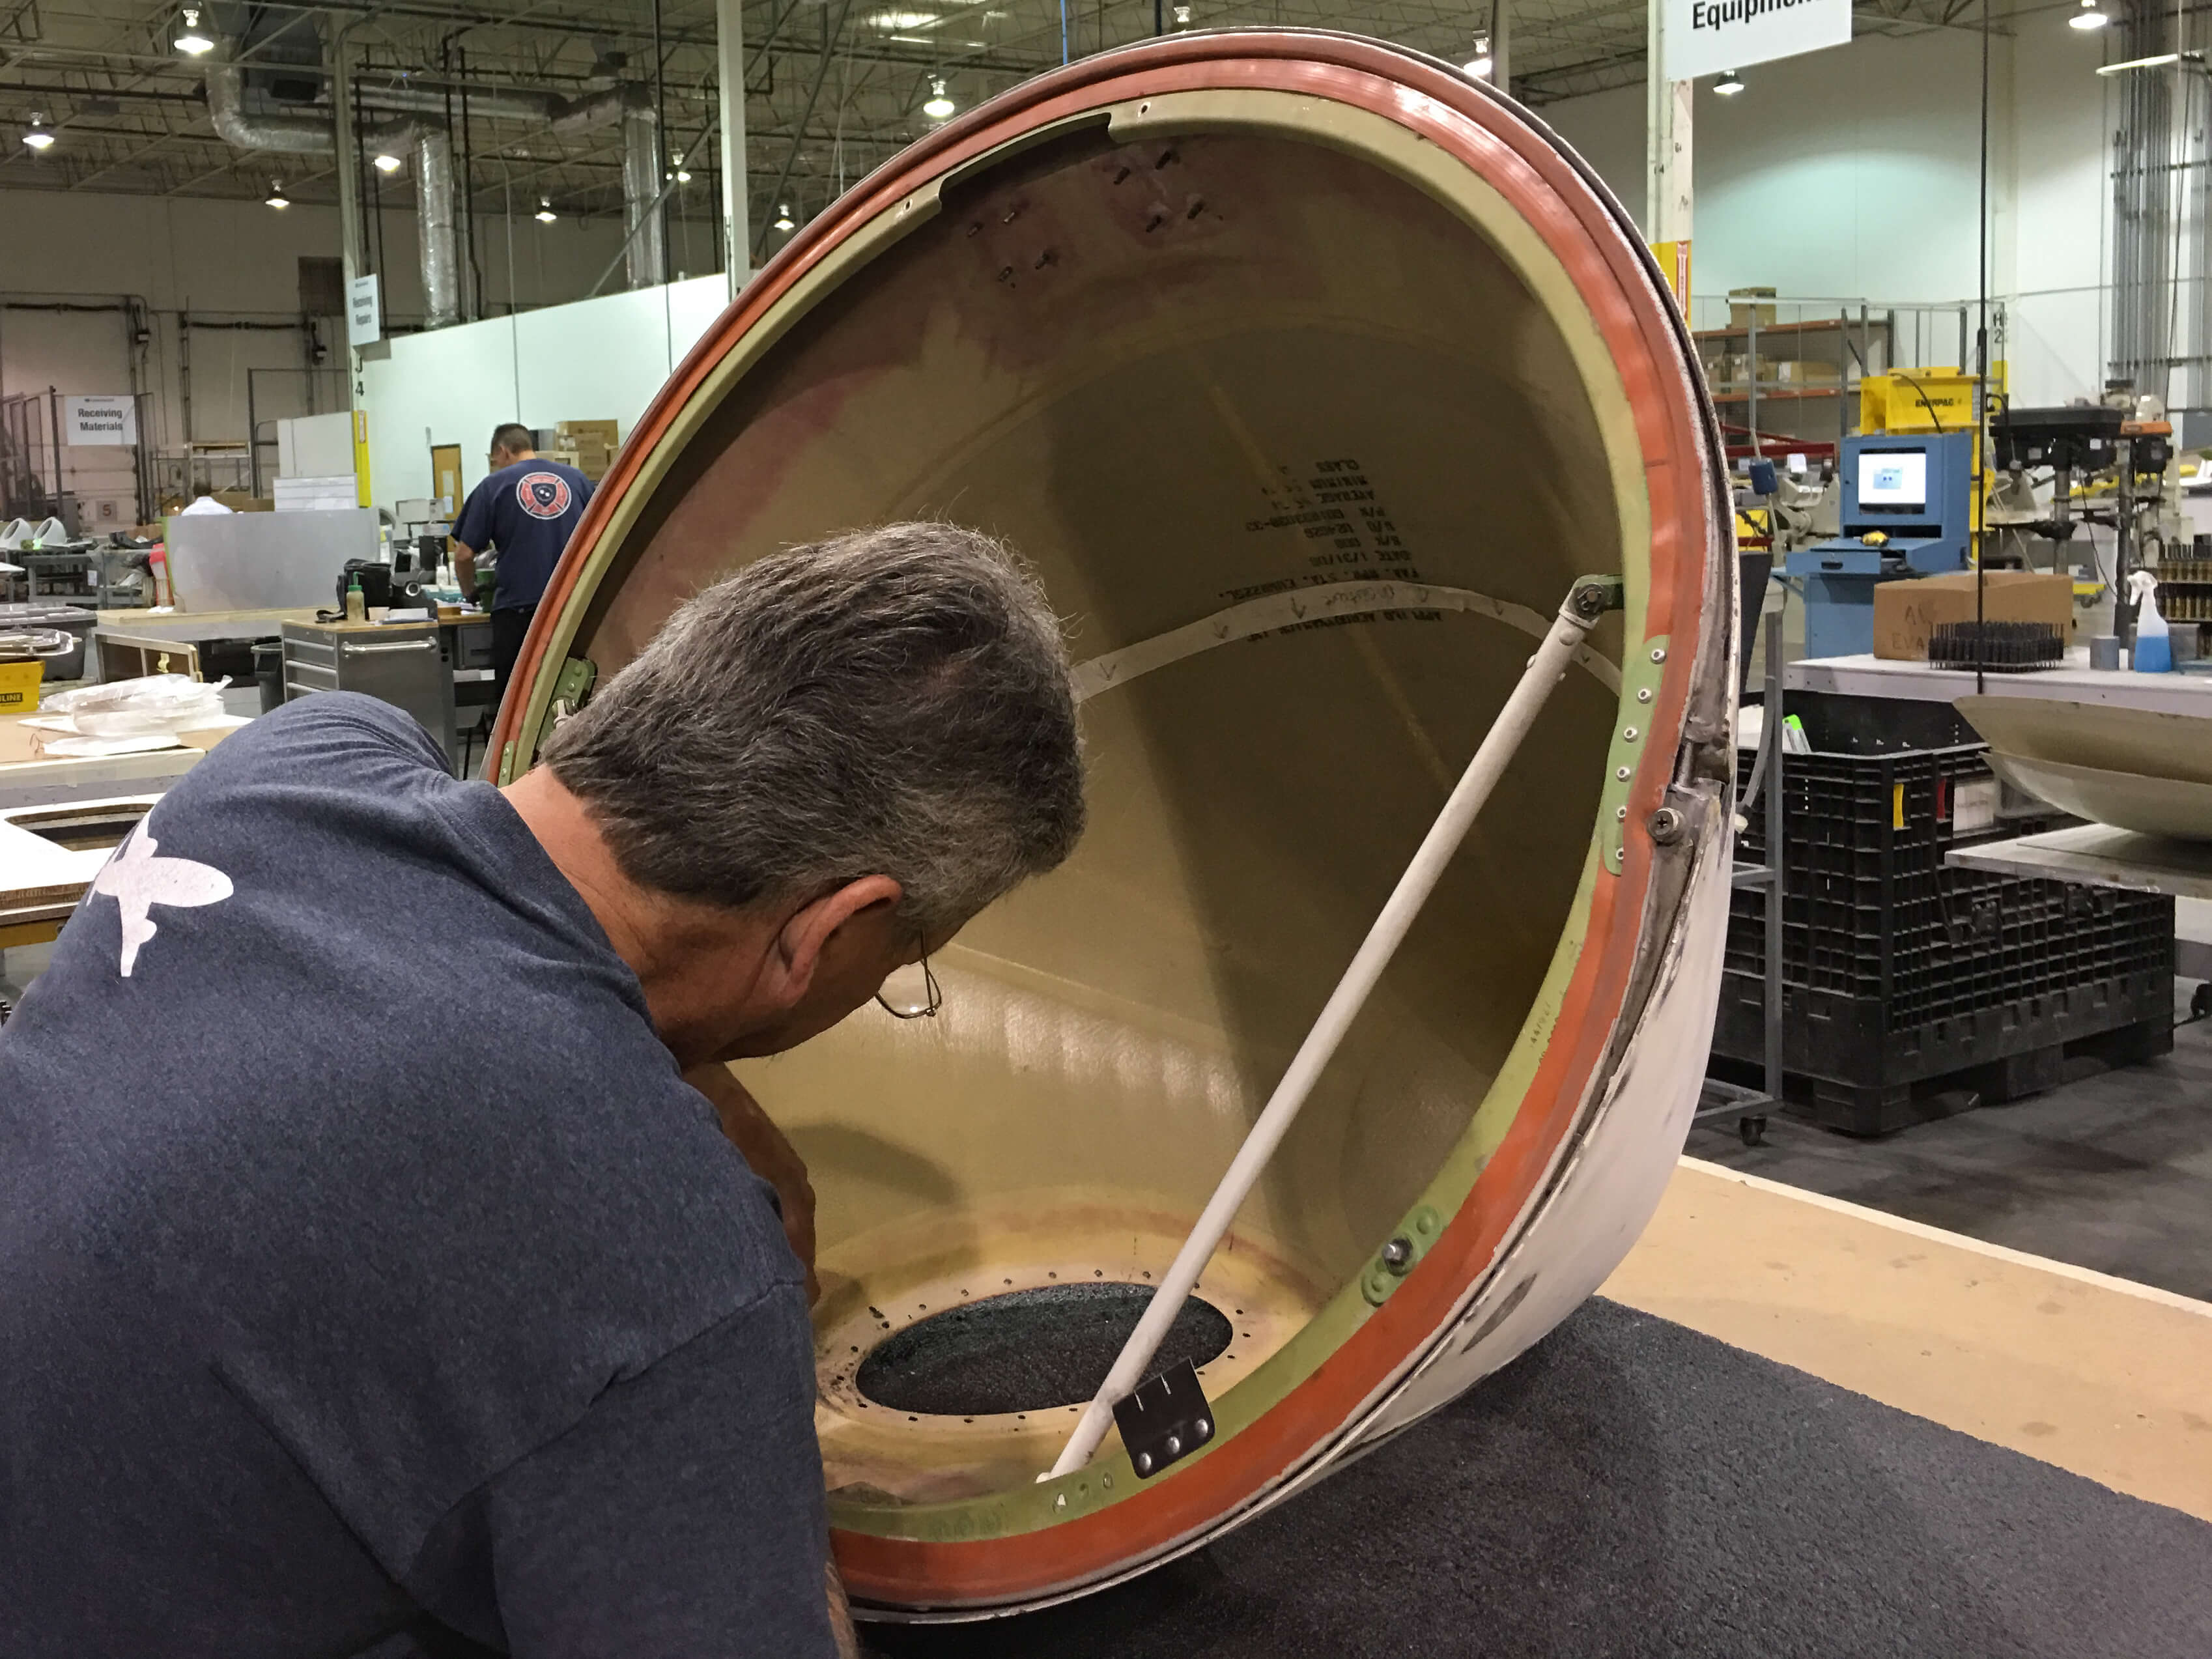 Cleaning the inside of a CJR 100/200 Radome before installing lens